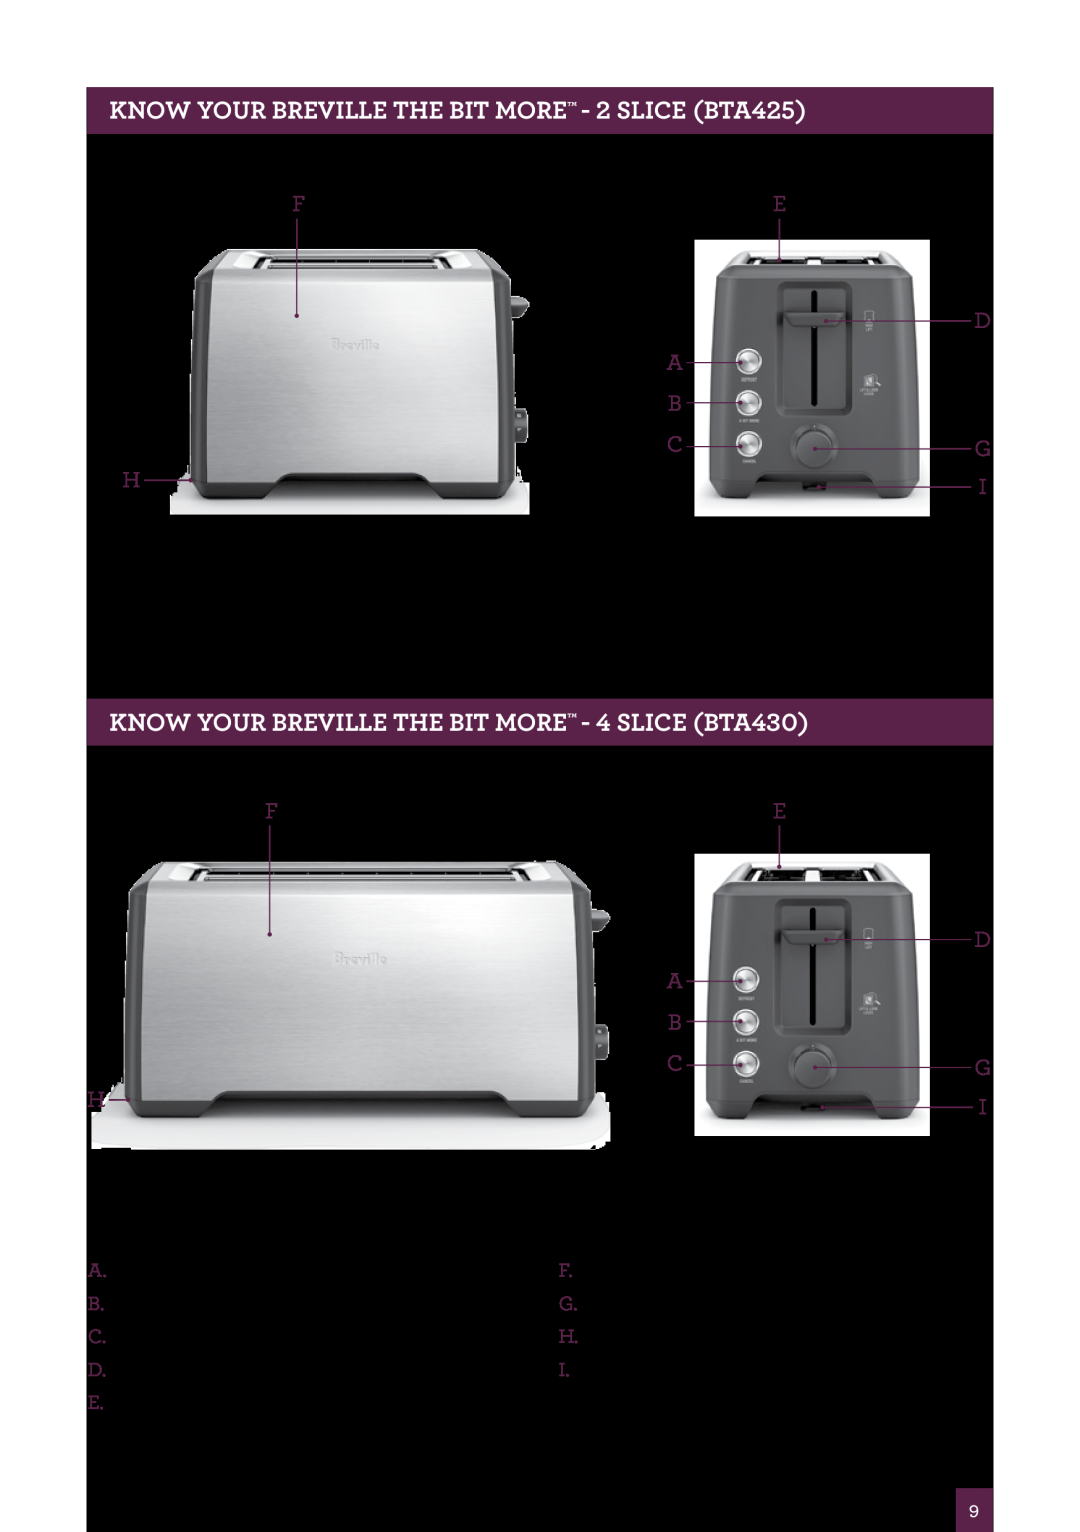 Breville Know your Breville The Bit More - 2 Slice BTA425, Know your Breville The Bit More - 4 Slice BTA430, Fe A B C H 